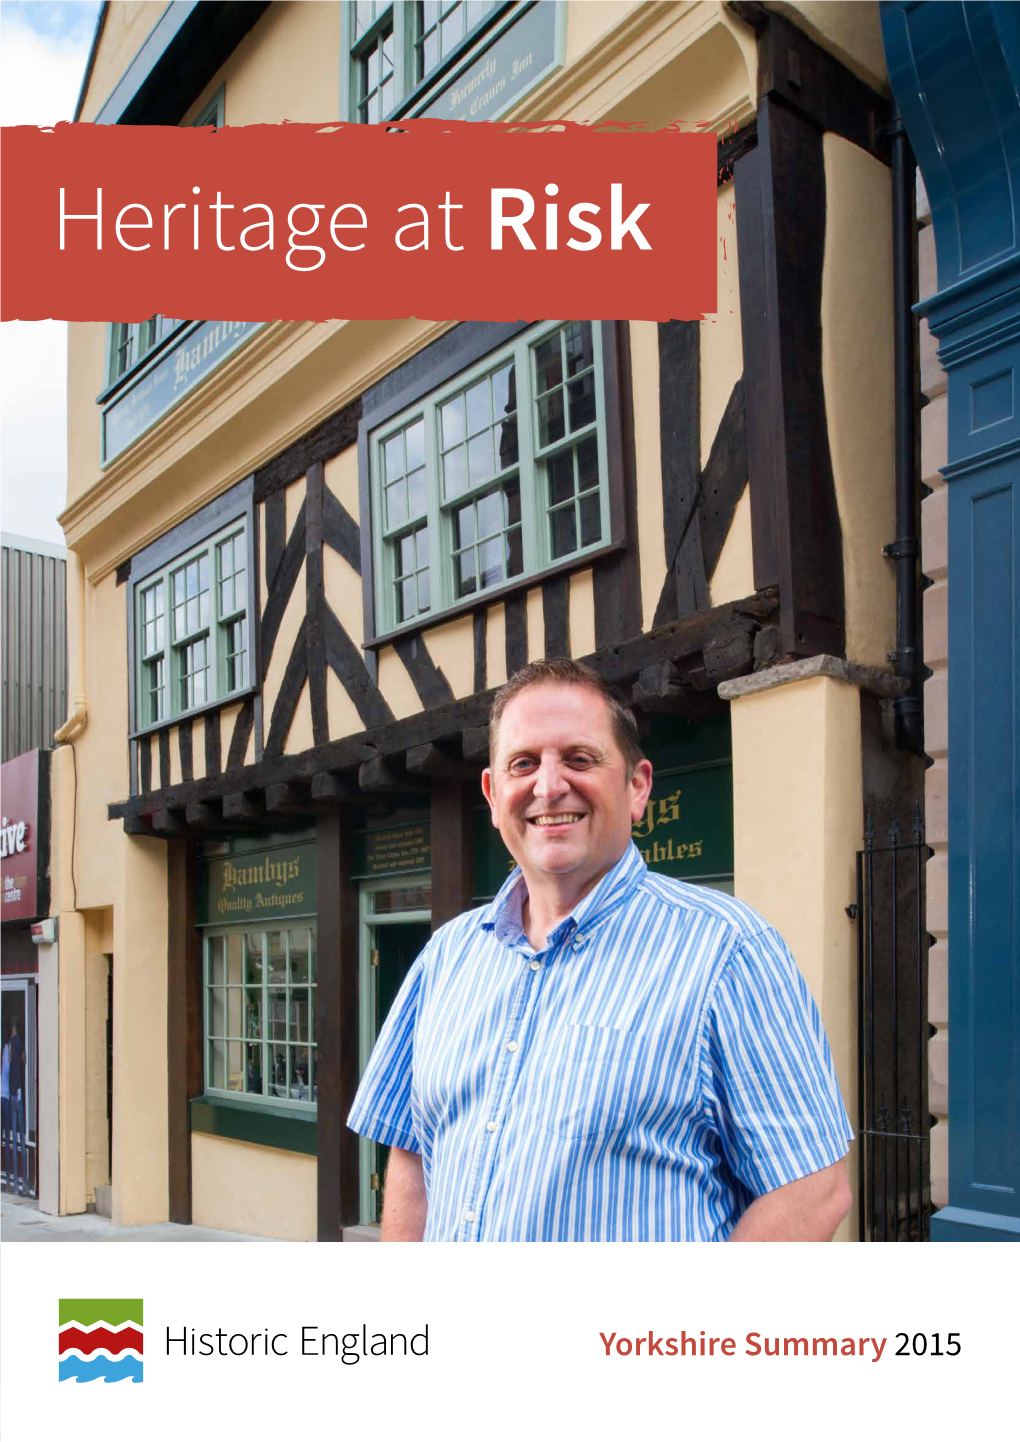 Yorkshire Summary 2015 E Have 694 Entries on the 2015 Heritage at Risk Register for Yorkshire, Making up 12.7% of the National Total of 5,478 Entries